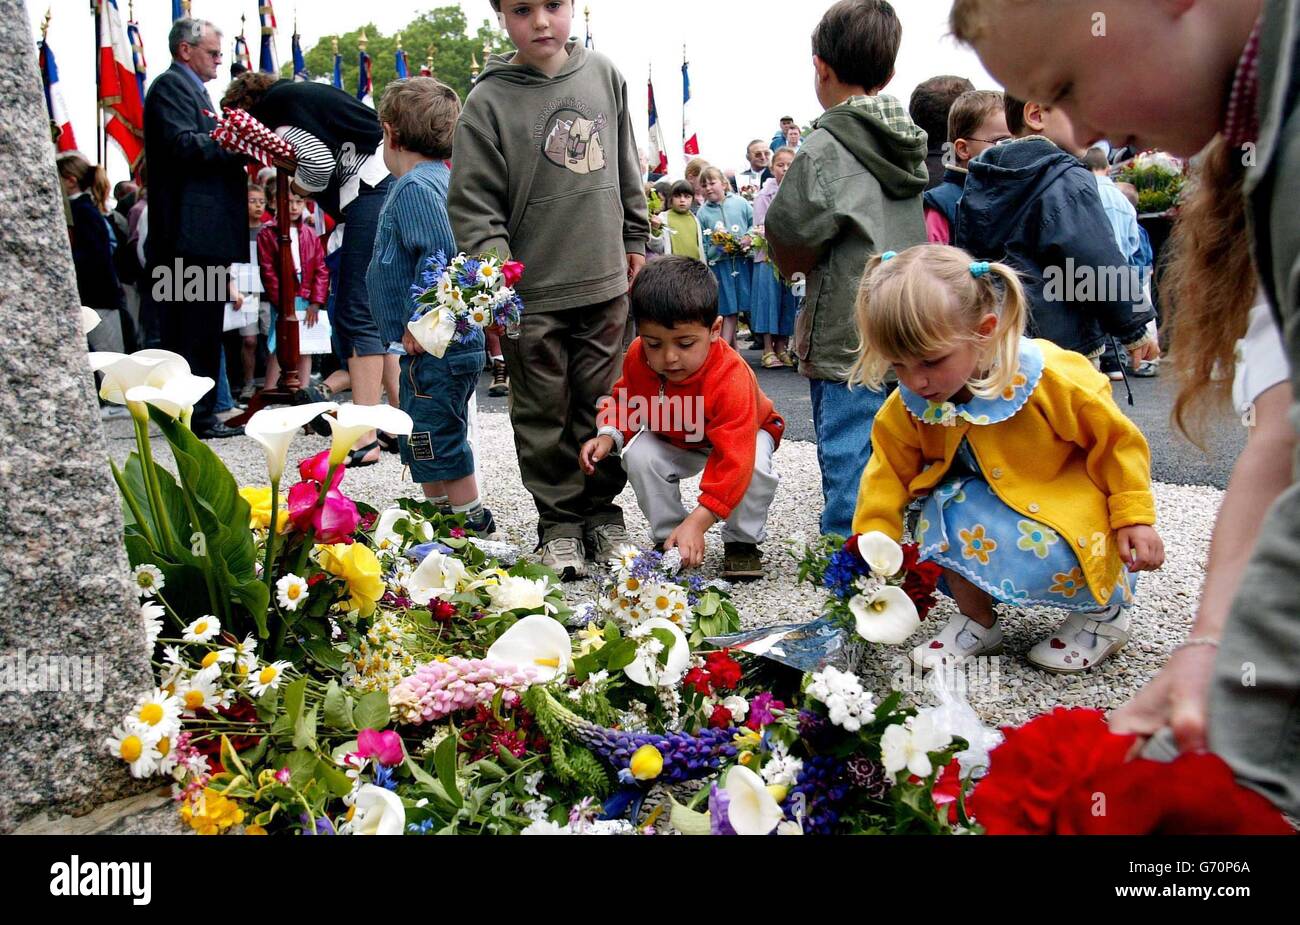 French schoolchildren from Magneville in Normandy lay flowers at a memorial in their village to soldiers of the American 101st Airborne Division who were shot down on D-Day. This weekend see events to mark the 60th anniversary of the allied invasion of Europe. Stock Photo